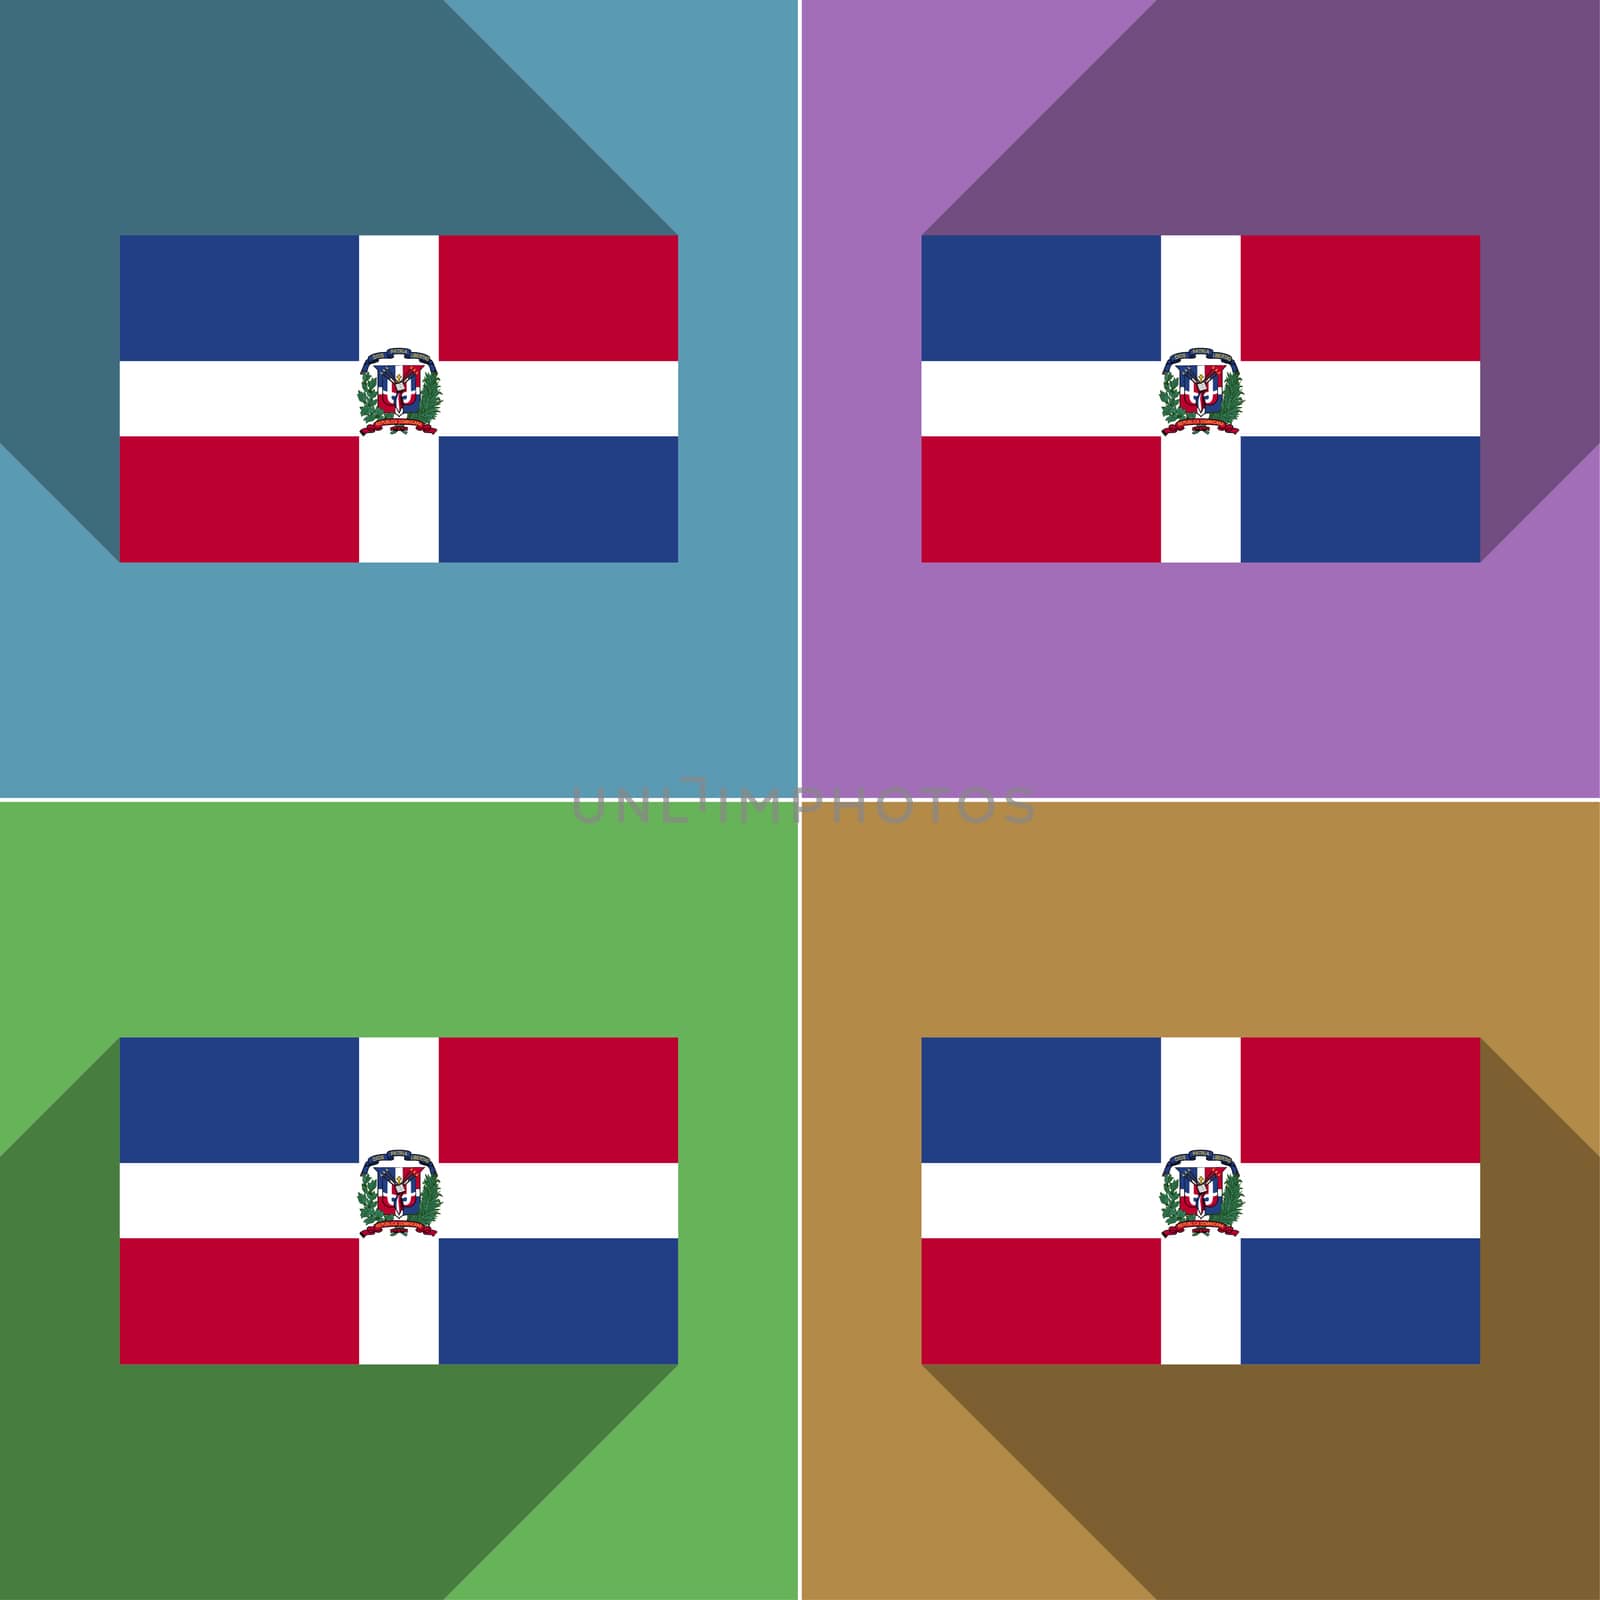 Flags of Dominican Republic. Set of colors flat design and long shadows.  illustration